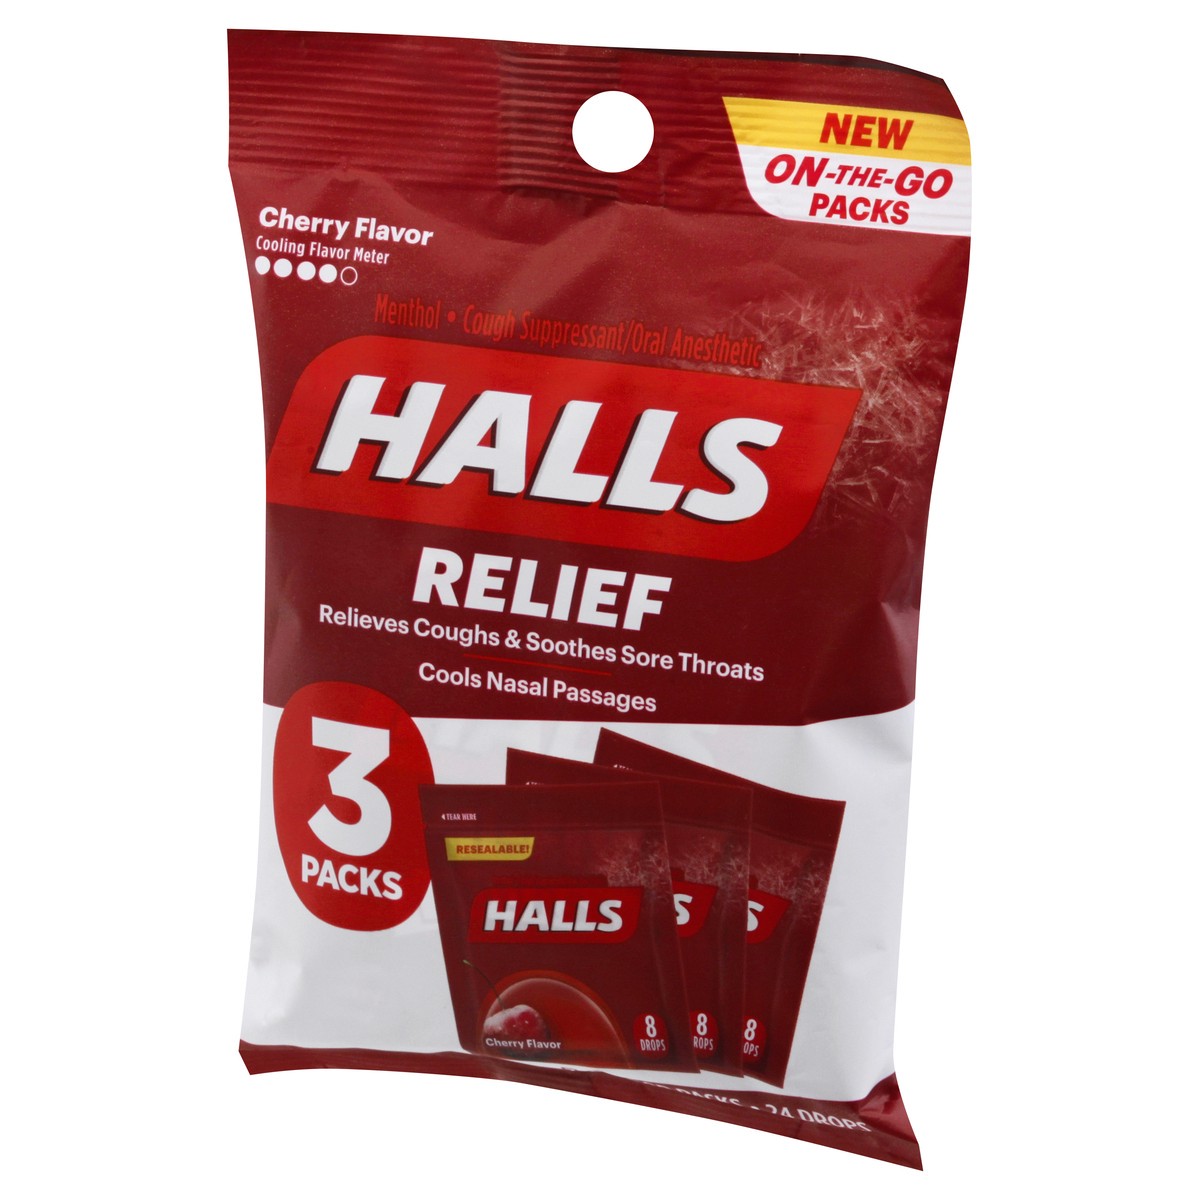 slide 5 of 11, HALLS Relief Cherry Cough Drops, 3 On-the-Go Packs of 8 Drops (24 Drops Total)
, 2.62 oz